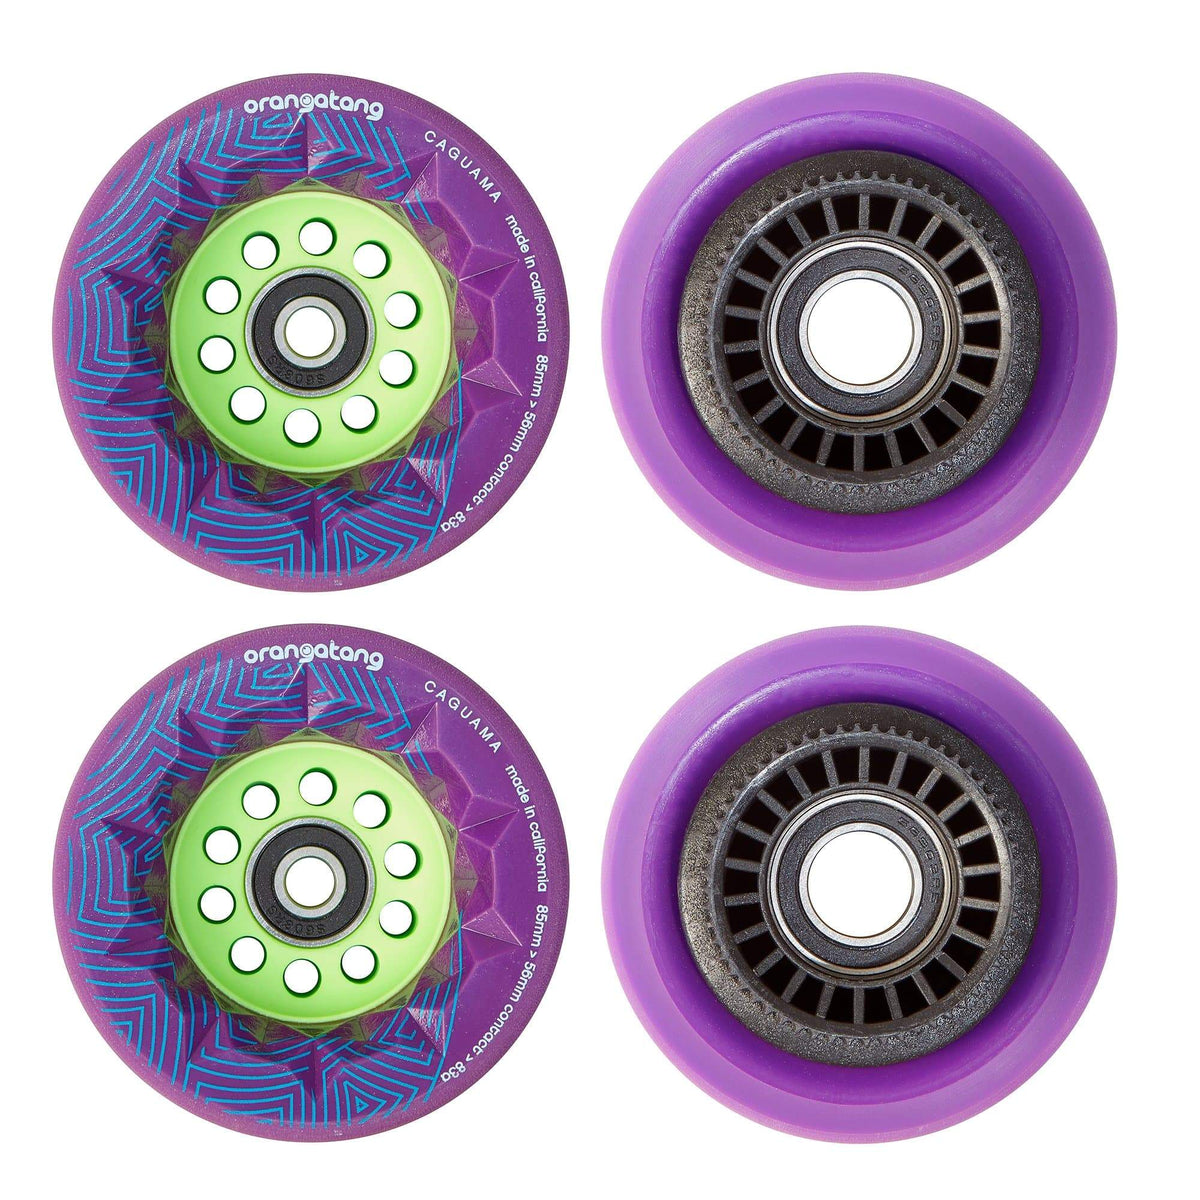 Purple 85mm Loaded Caguama Wheels W/ Pulleys (Full Set)- Boosted USA